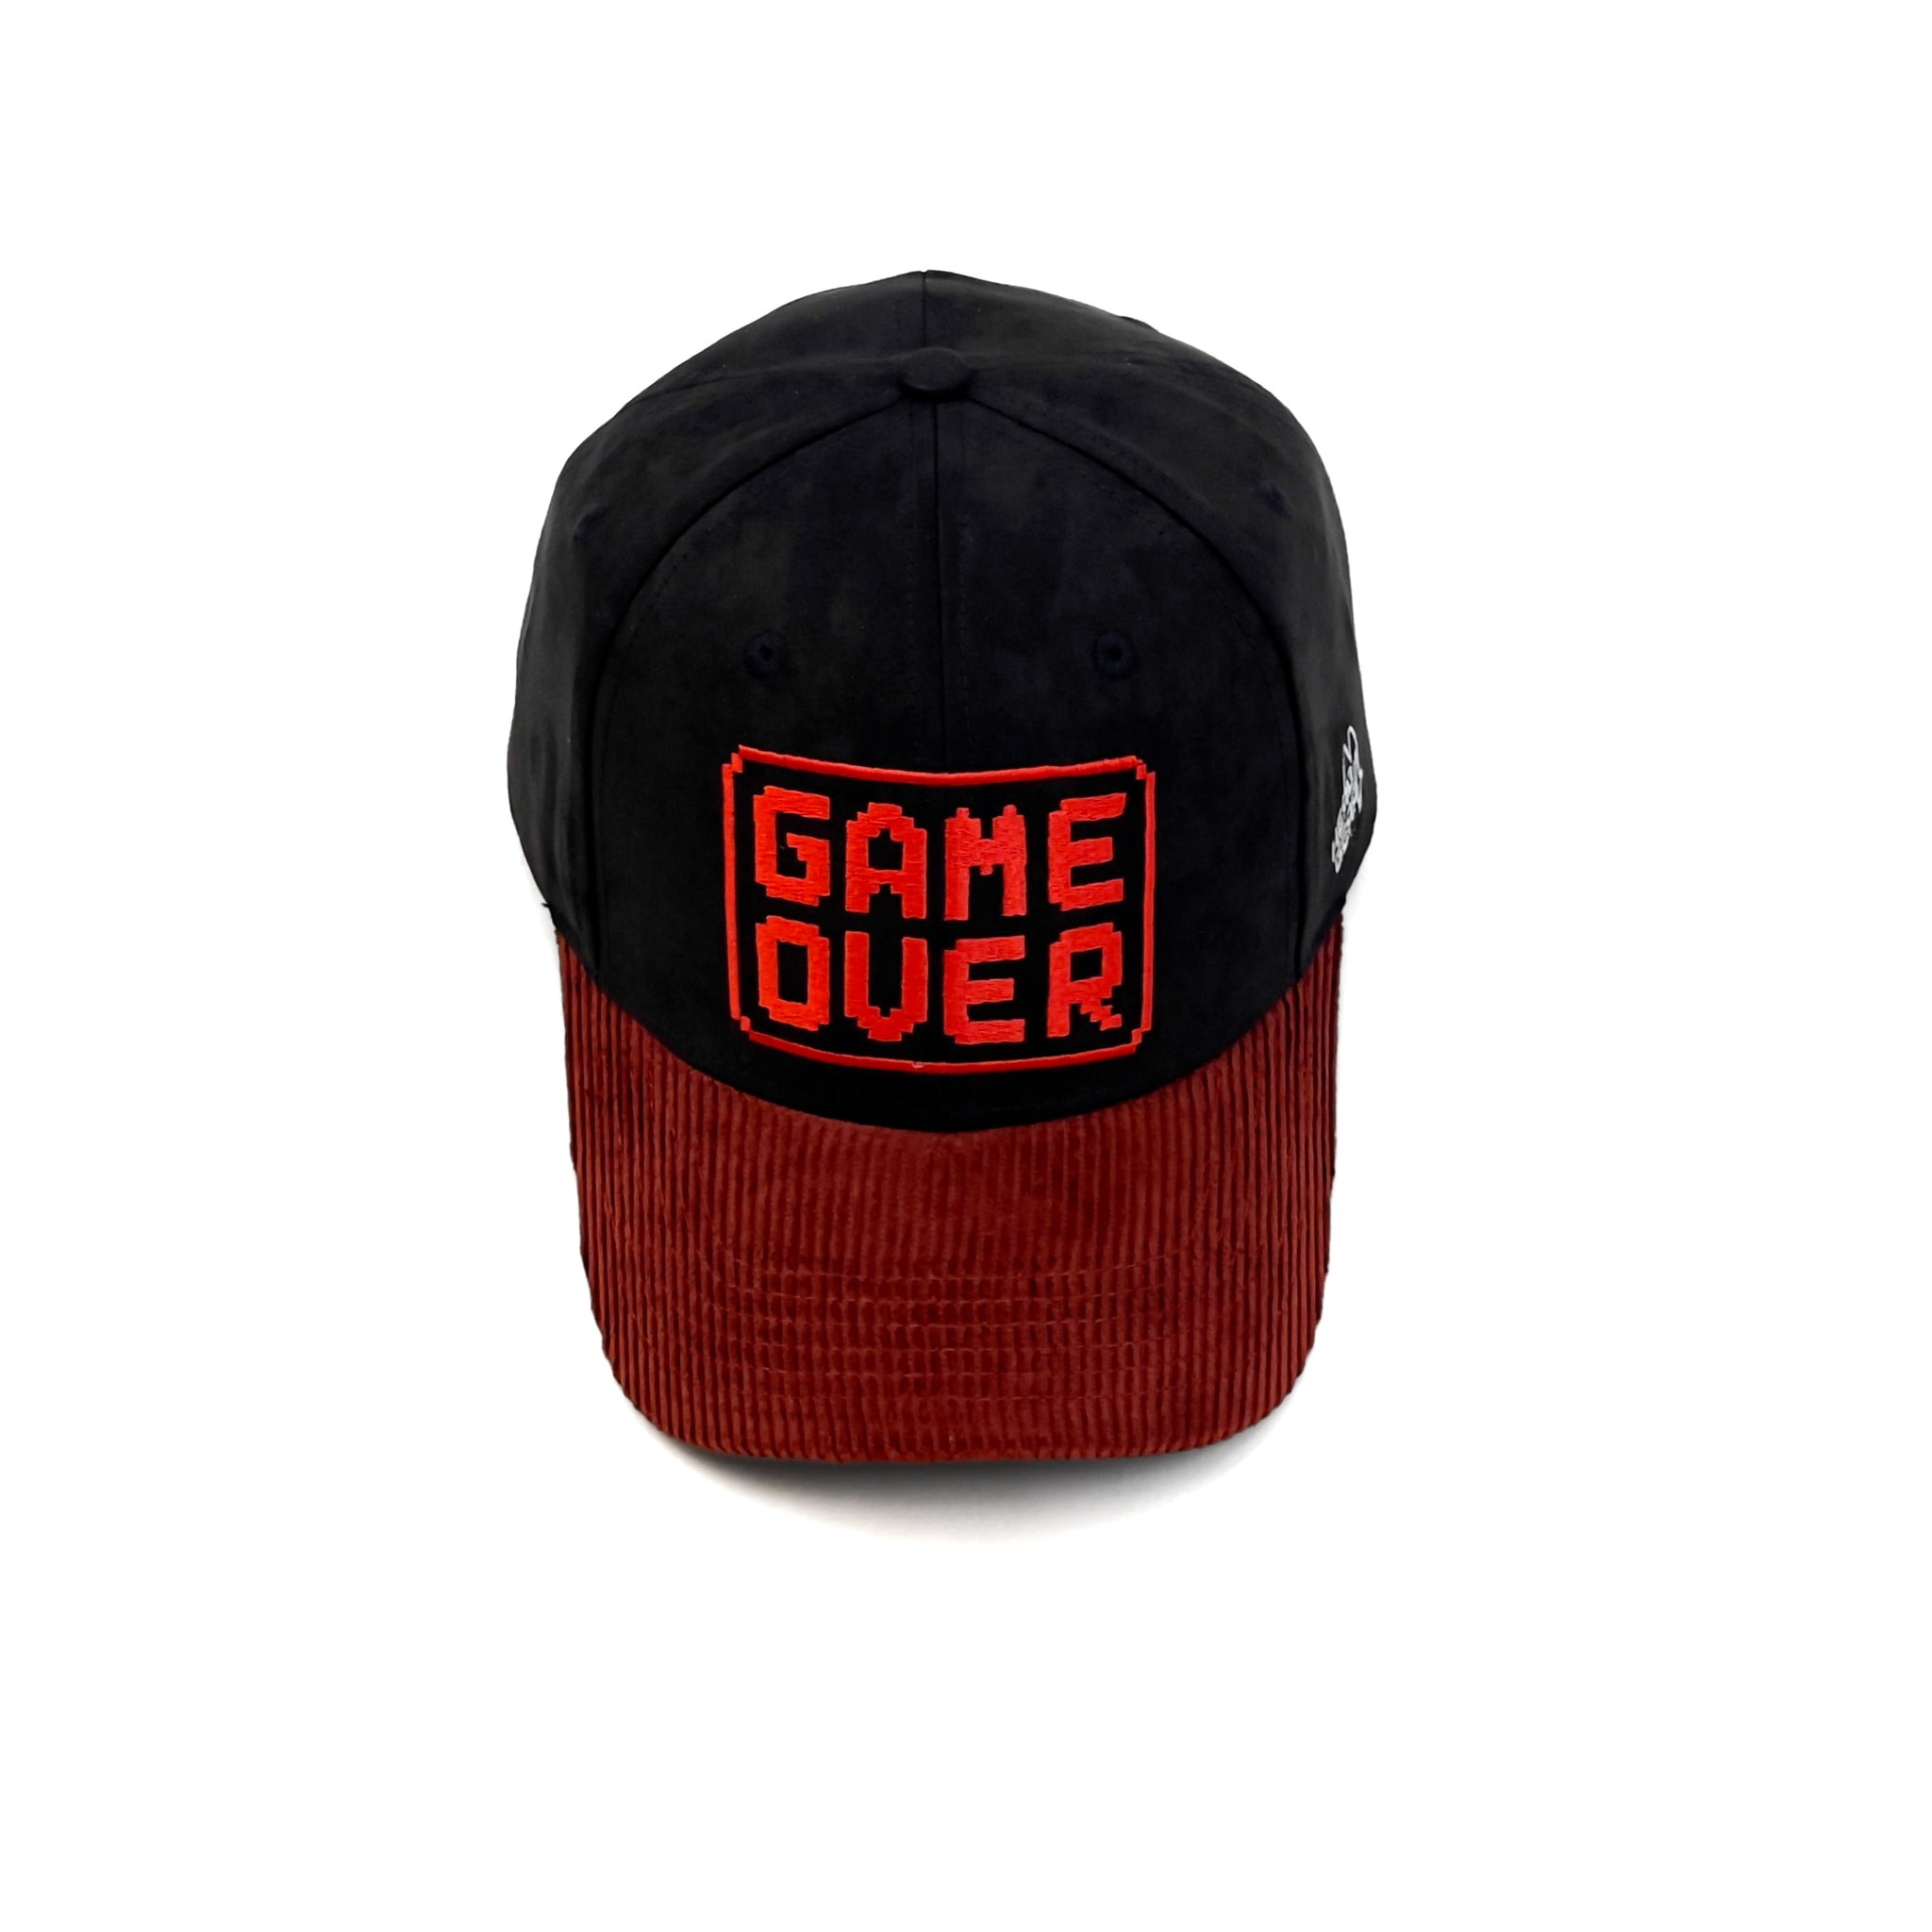 HEAD GEAR GAME OVER CURVED VISOR CAP